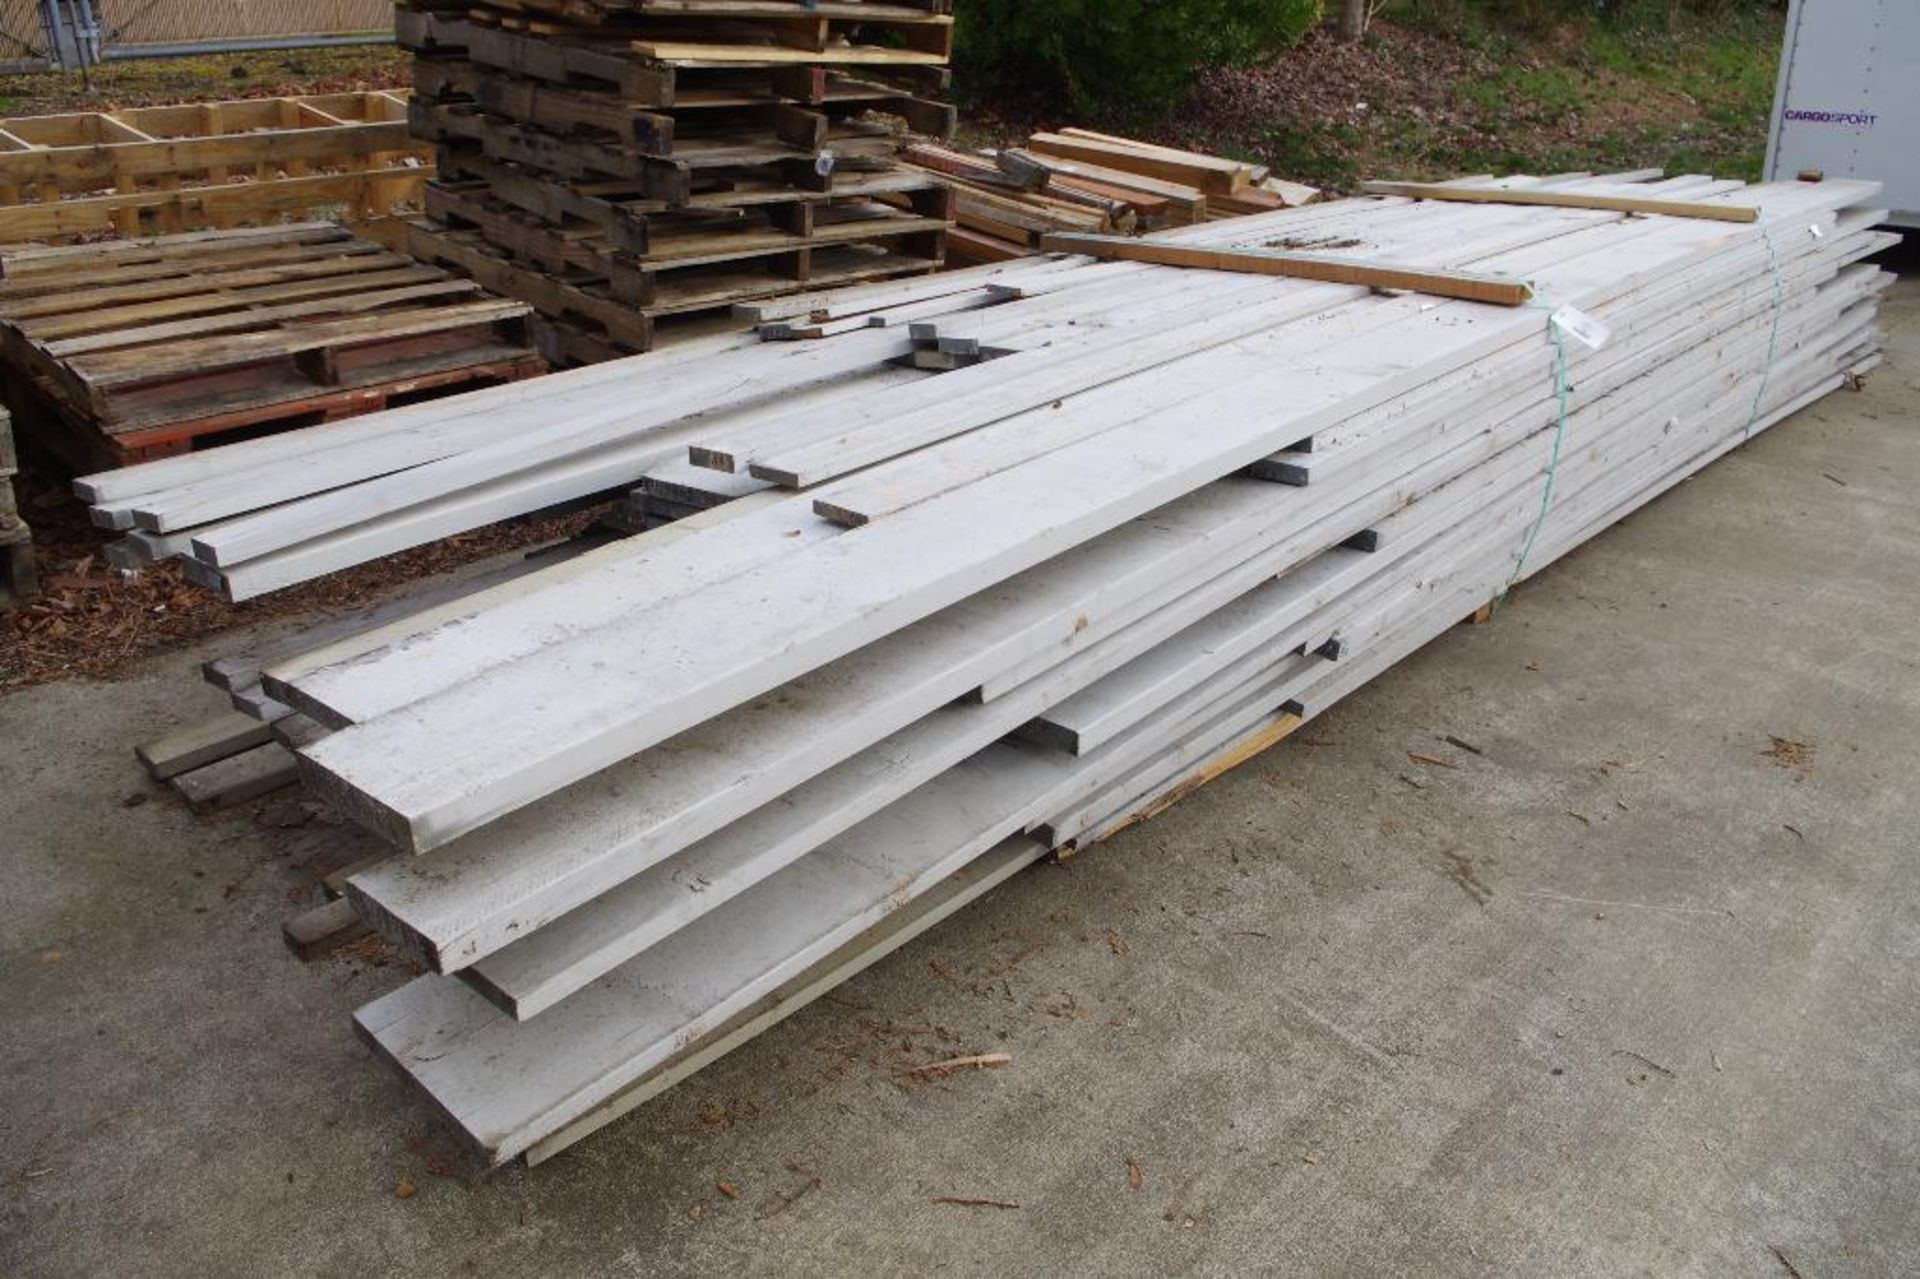 [QTY] Misc. White Wood Trim, Lengths up to 20'